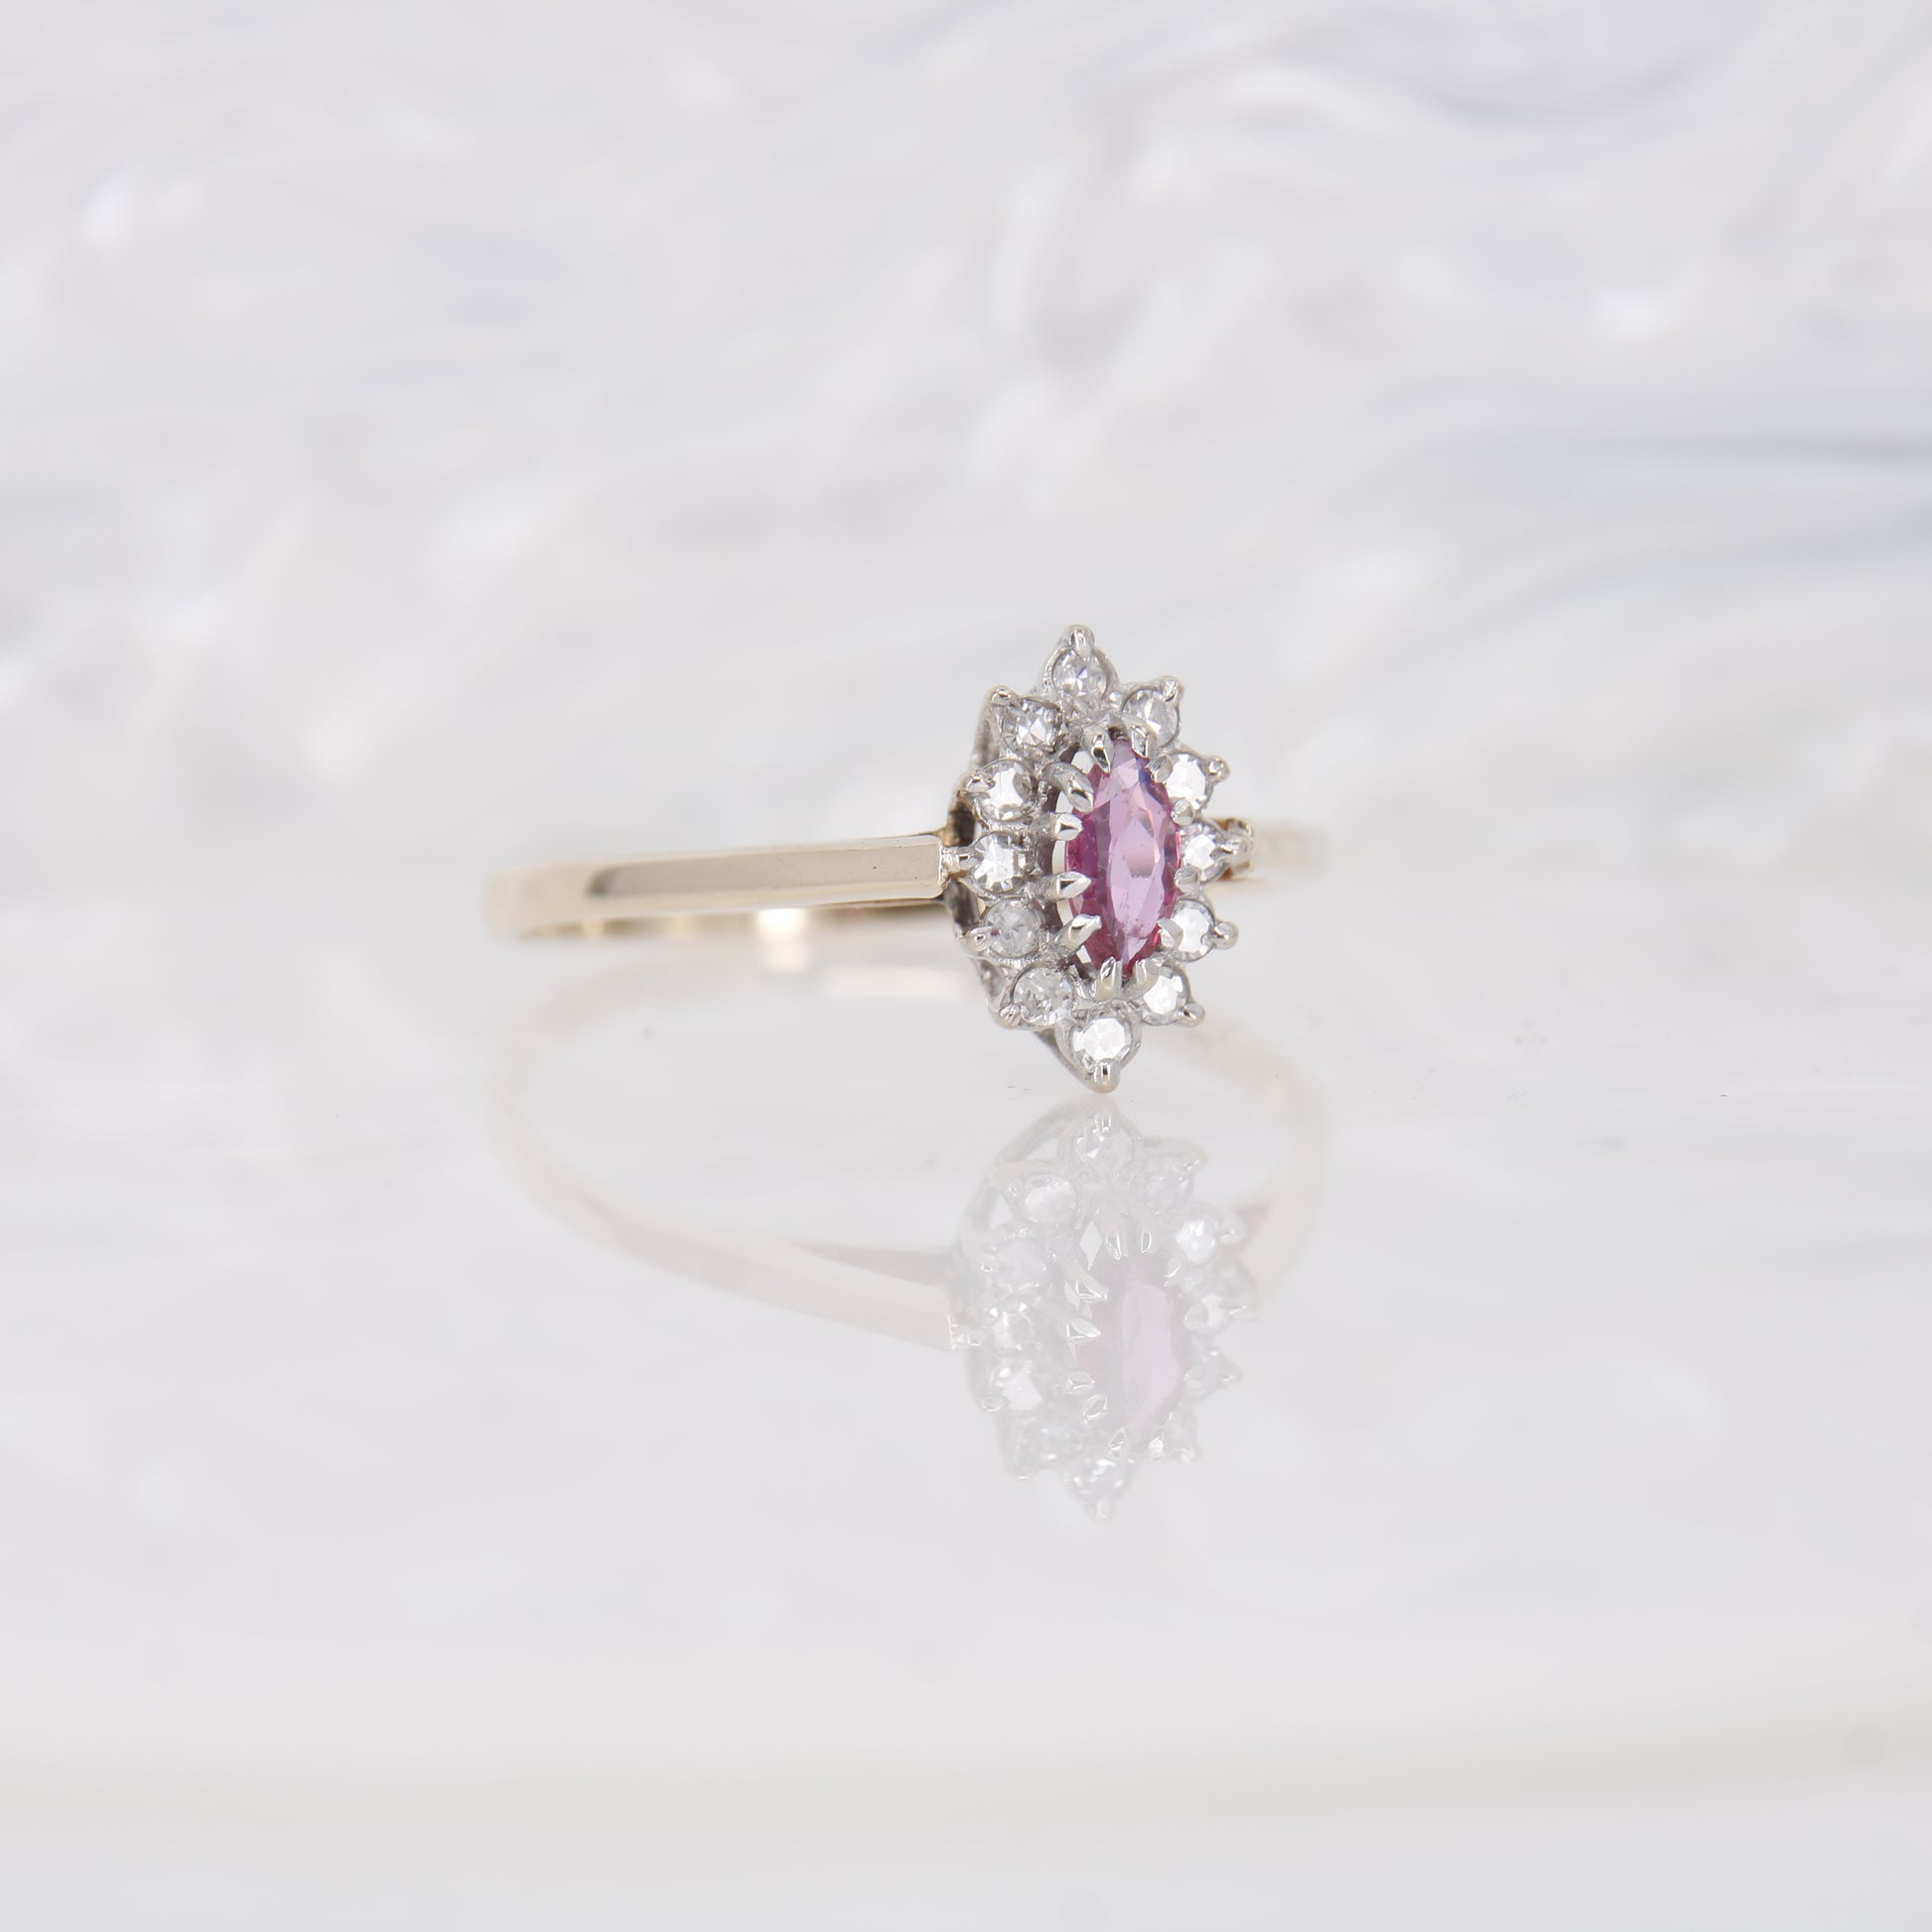 Pink Sapphire and Diamond Engagement Ring, Yellow Gold. Marquise Cut Pink Sapphire preowned.